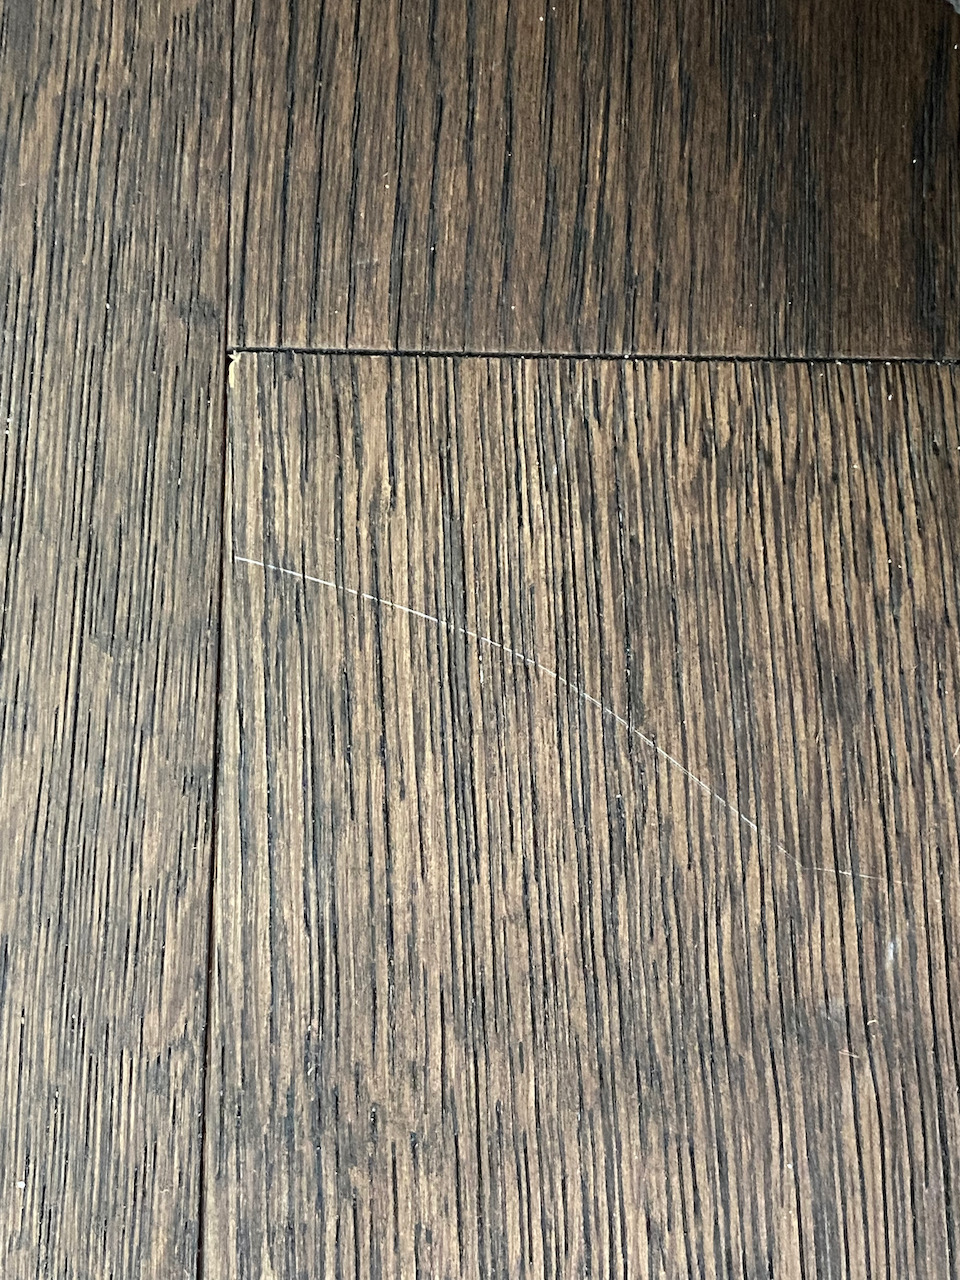 scratches on brand new floor